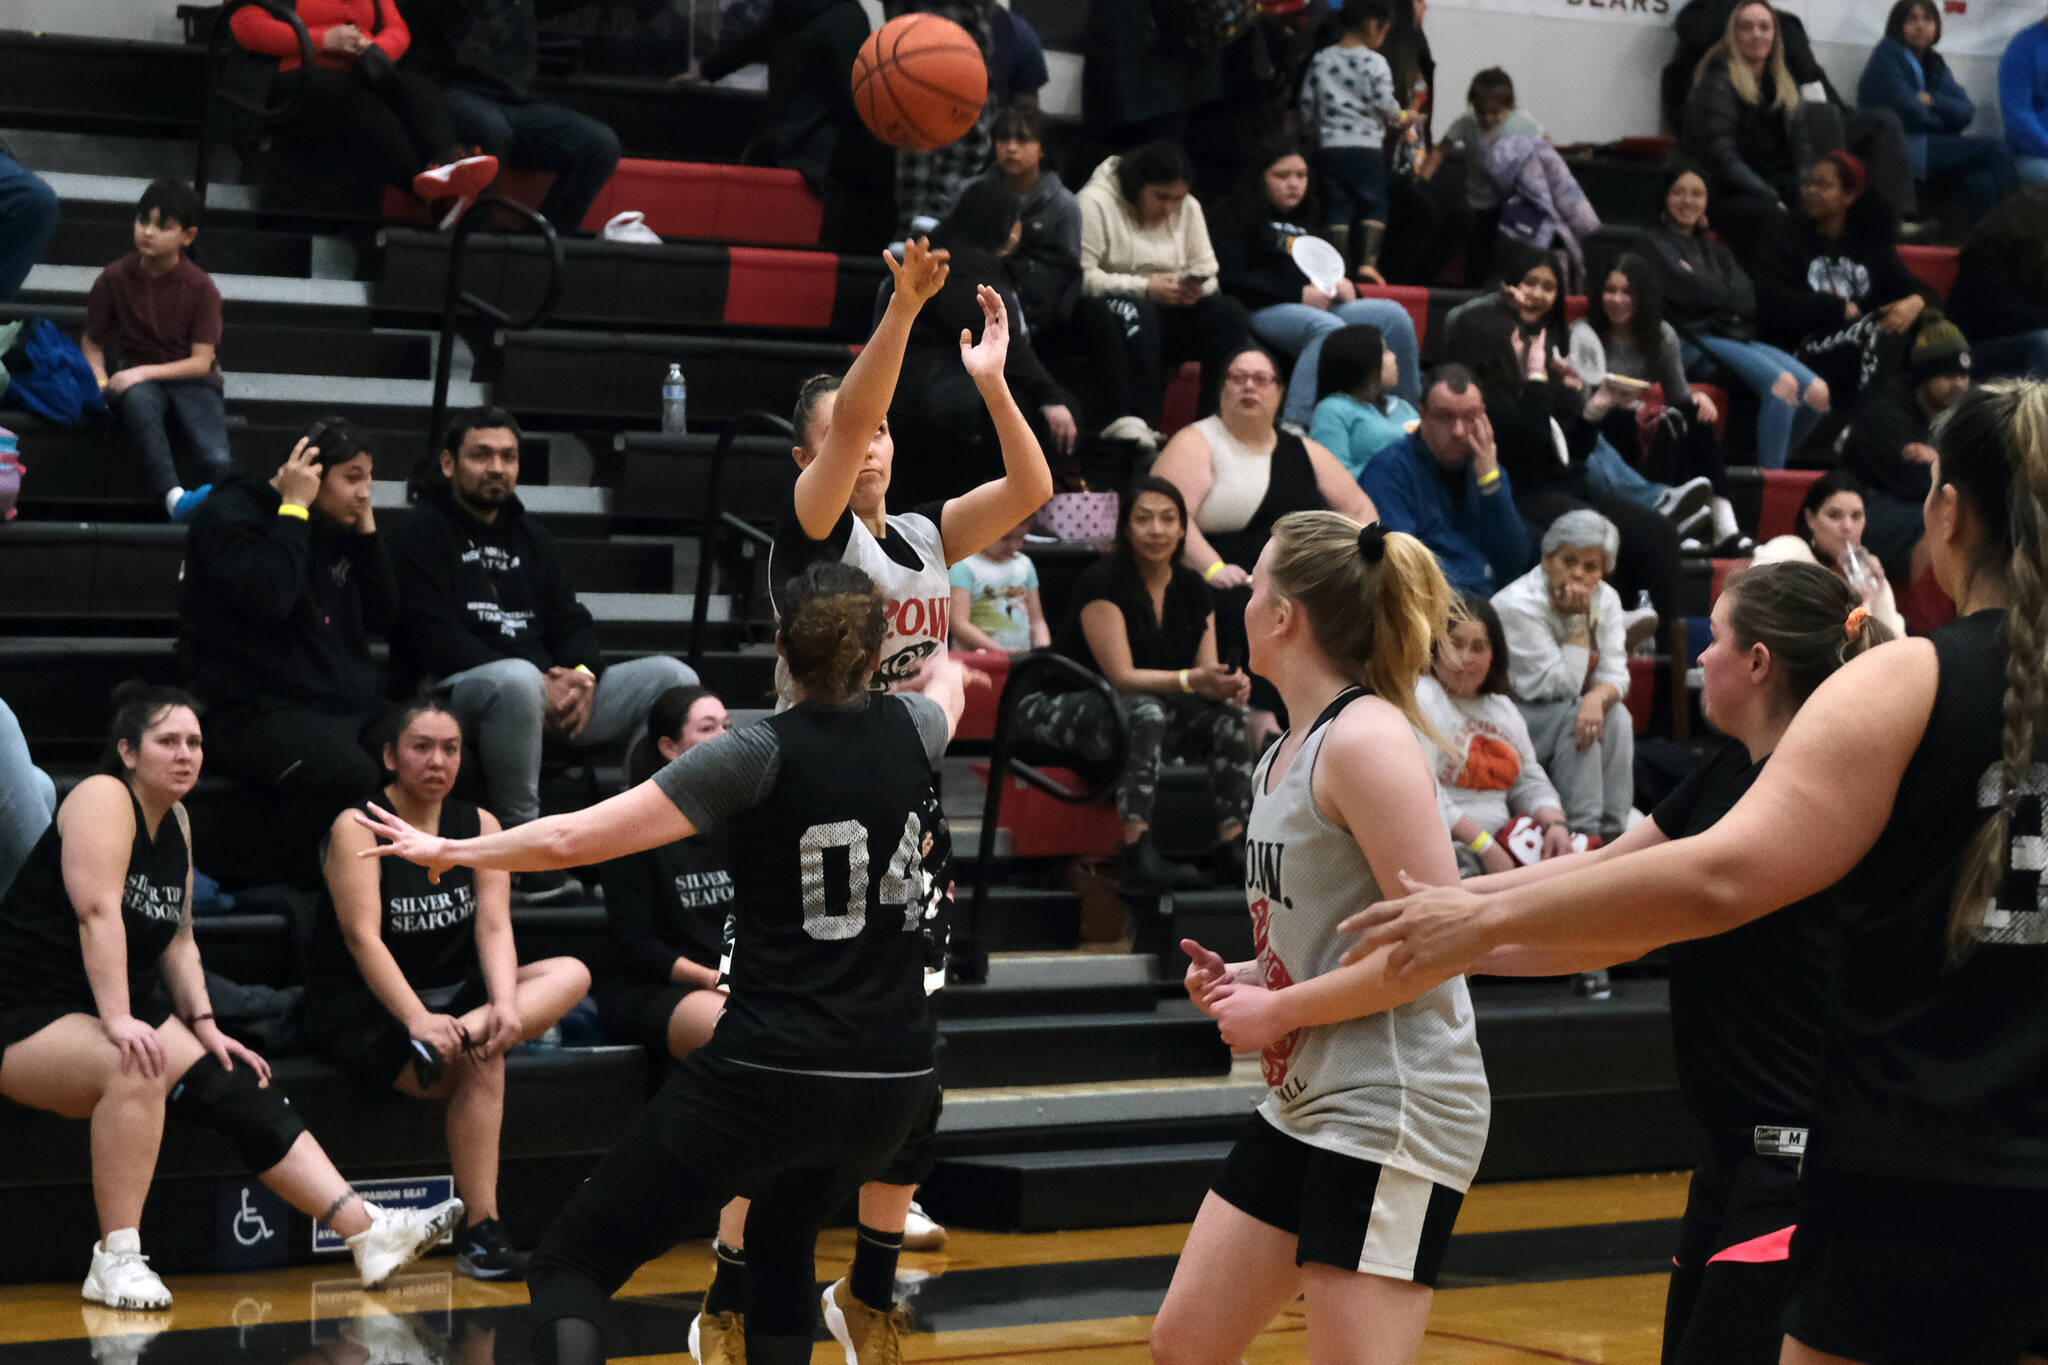 Prince of Wales’ Cassi Williams hits one of her five three point shots in POW’s win over Sitka at the Gold Medal tournament, Tuesday, March 21, in the Juneau-Douglas High School: Yadaa.at Kalé gymnasium.